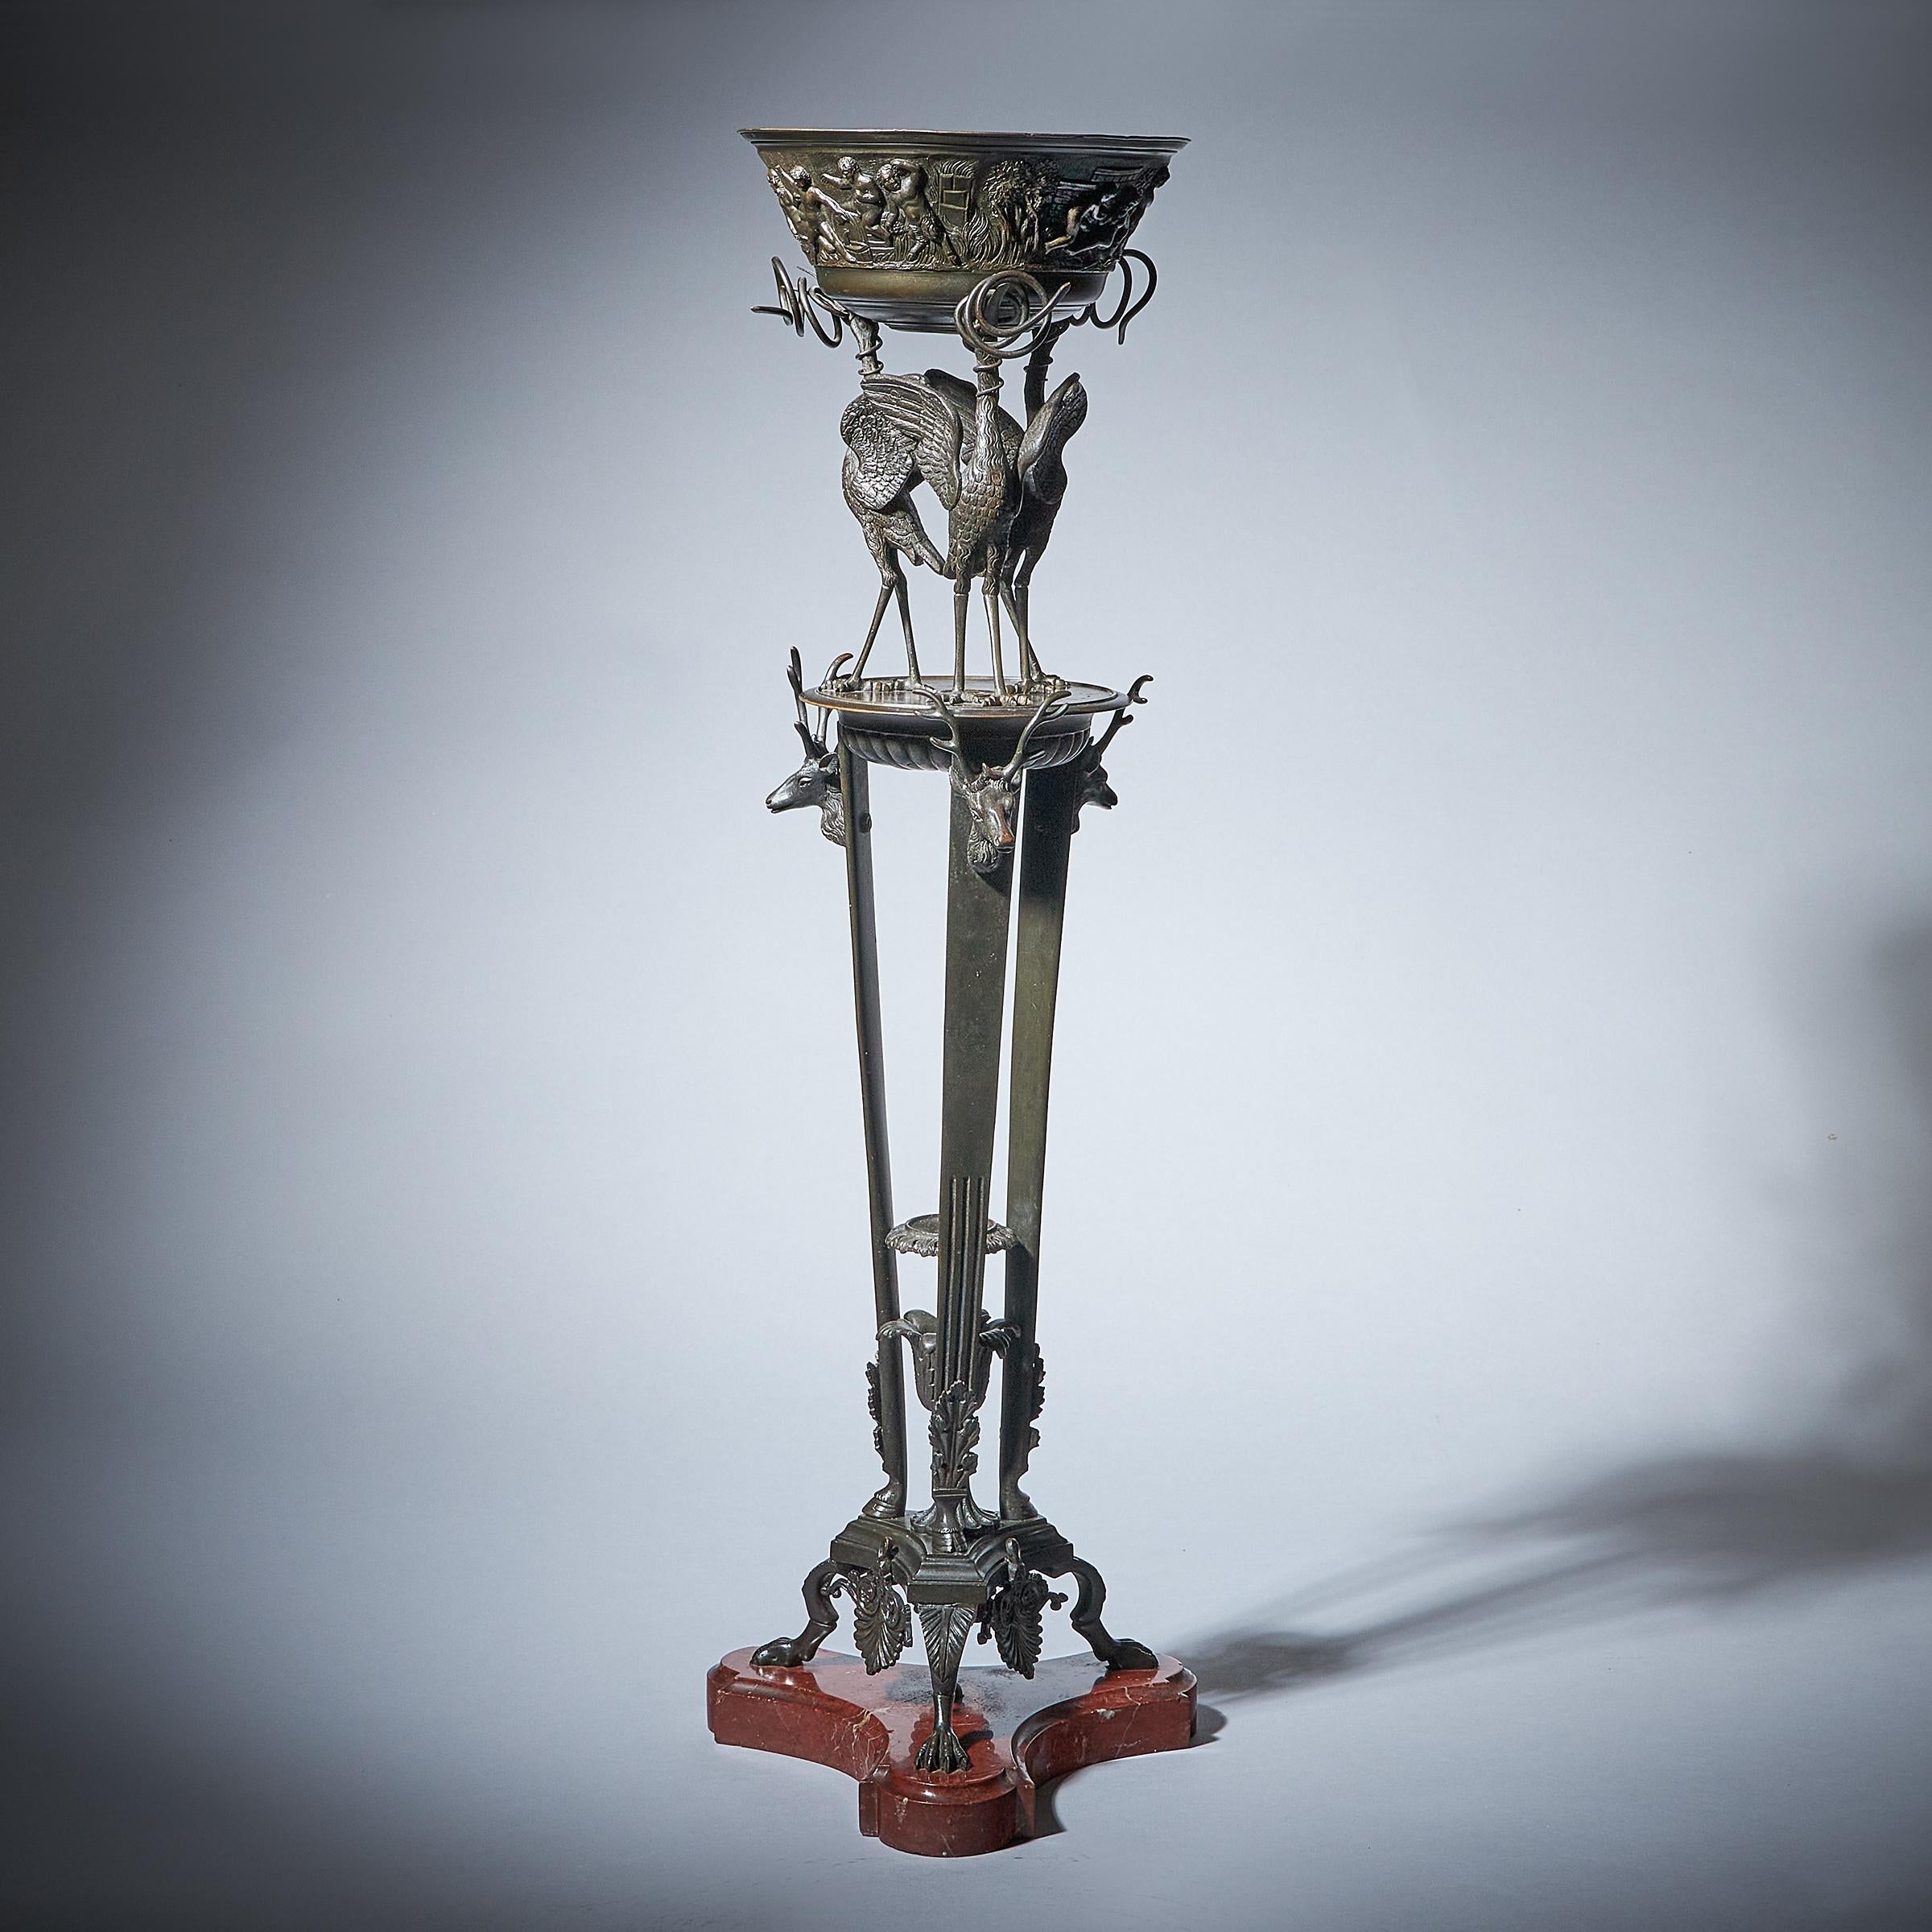 A superb grand tour 19th-century grand tour bronze tiered tripod-stand supporting a highly decorated jardiniere raised by three cranes. 

Each of the three tripod legs is fitted with a stag to the top, stop-reeded and hoofed to the base with a